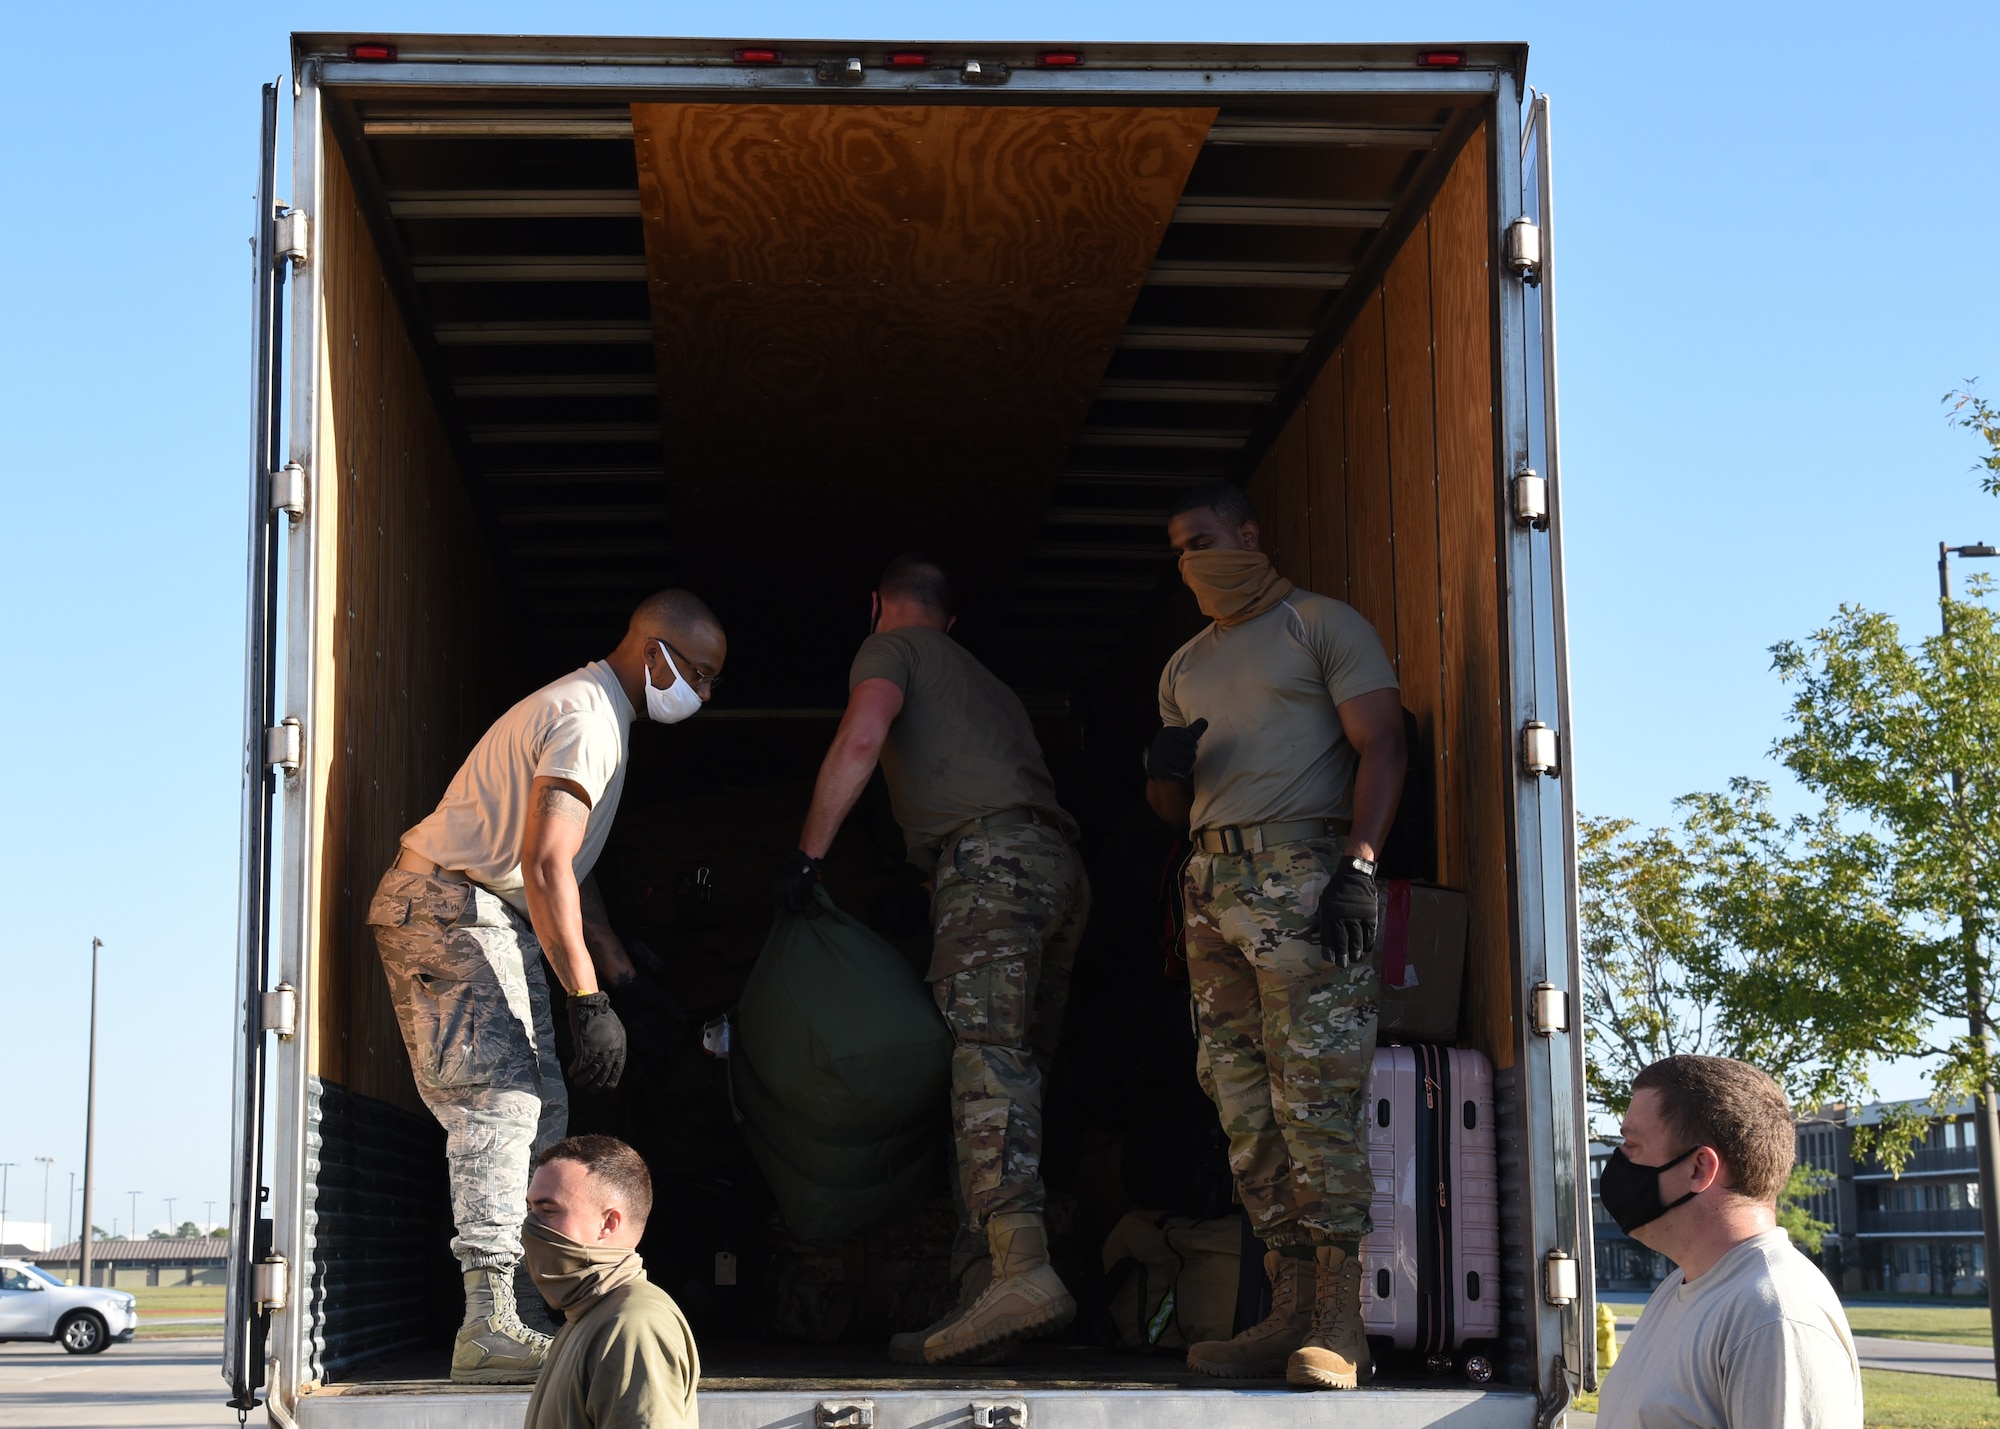 Members of the Air National Guard and the 403rd Wing work together loading bags onto a truck at Camp Gulfport, which is located at the Gulfport Combat Readiness Training Center, where one Restriction of Movement operation was set up in order to prevent the spread of COVID-19. ROMs were put into effect before all deployments start, in order to ensure the safety of service members in the U.S. Central, Africa, and European Commands area of responsibilty. (U.S. Air Force photo by Jessica L. Kendziorek)